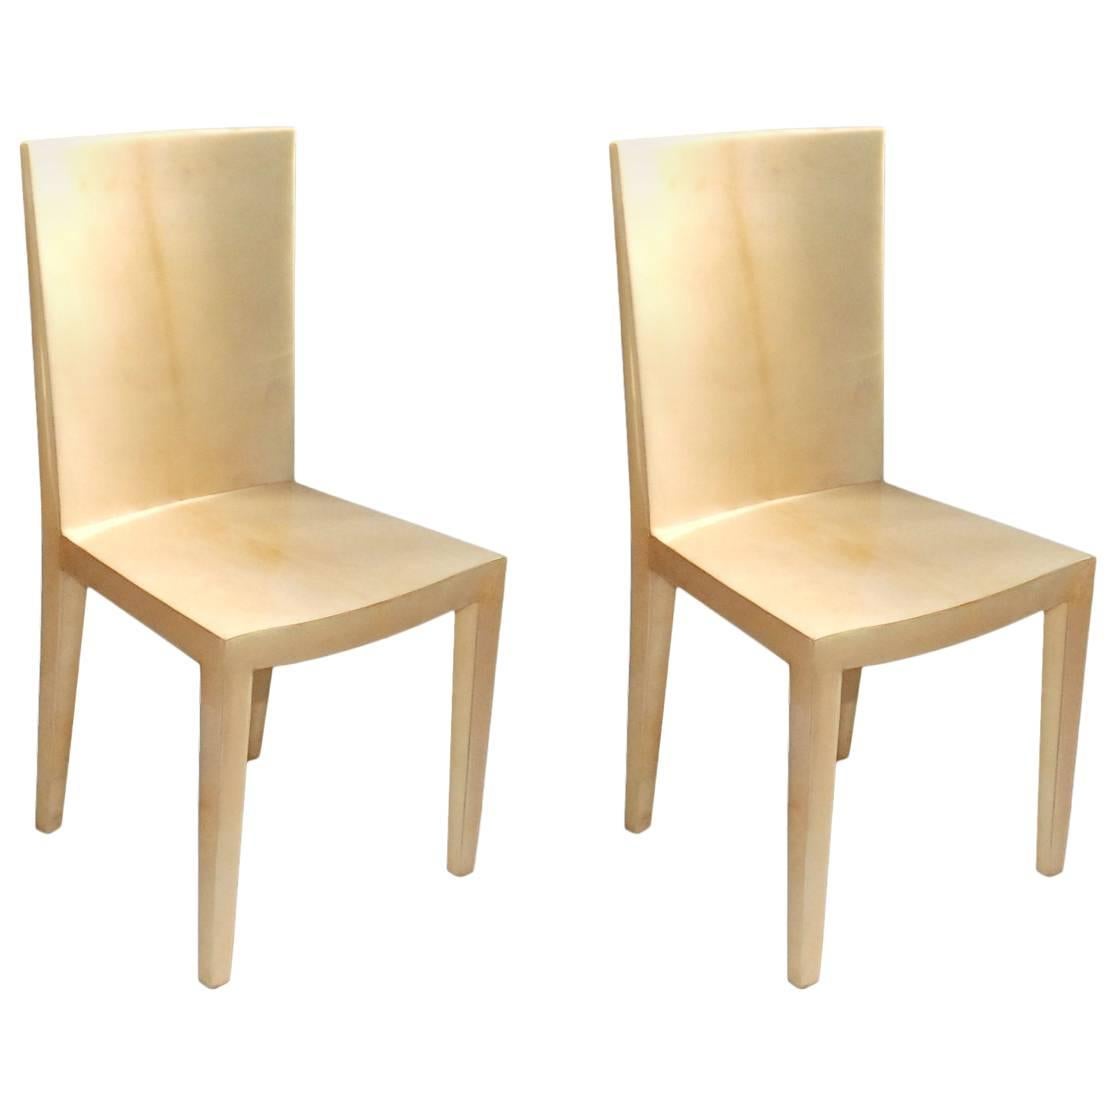 Pair of Parchment Side Chairs